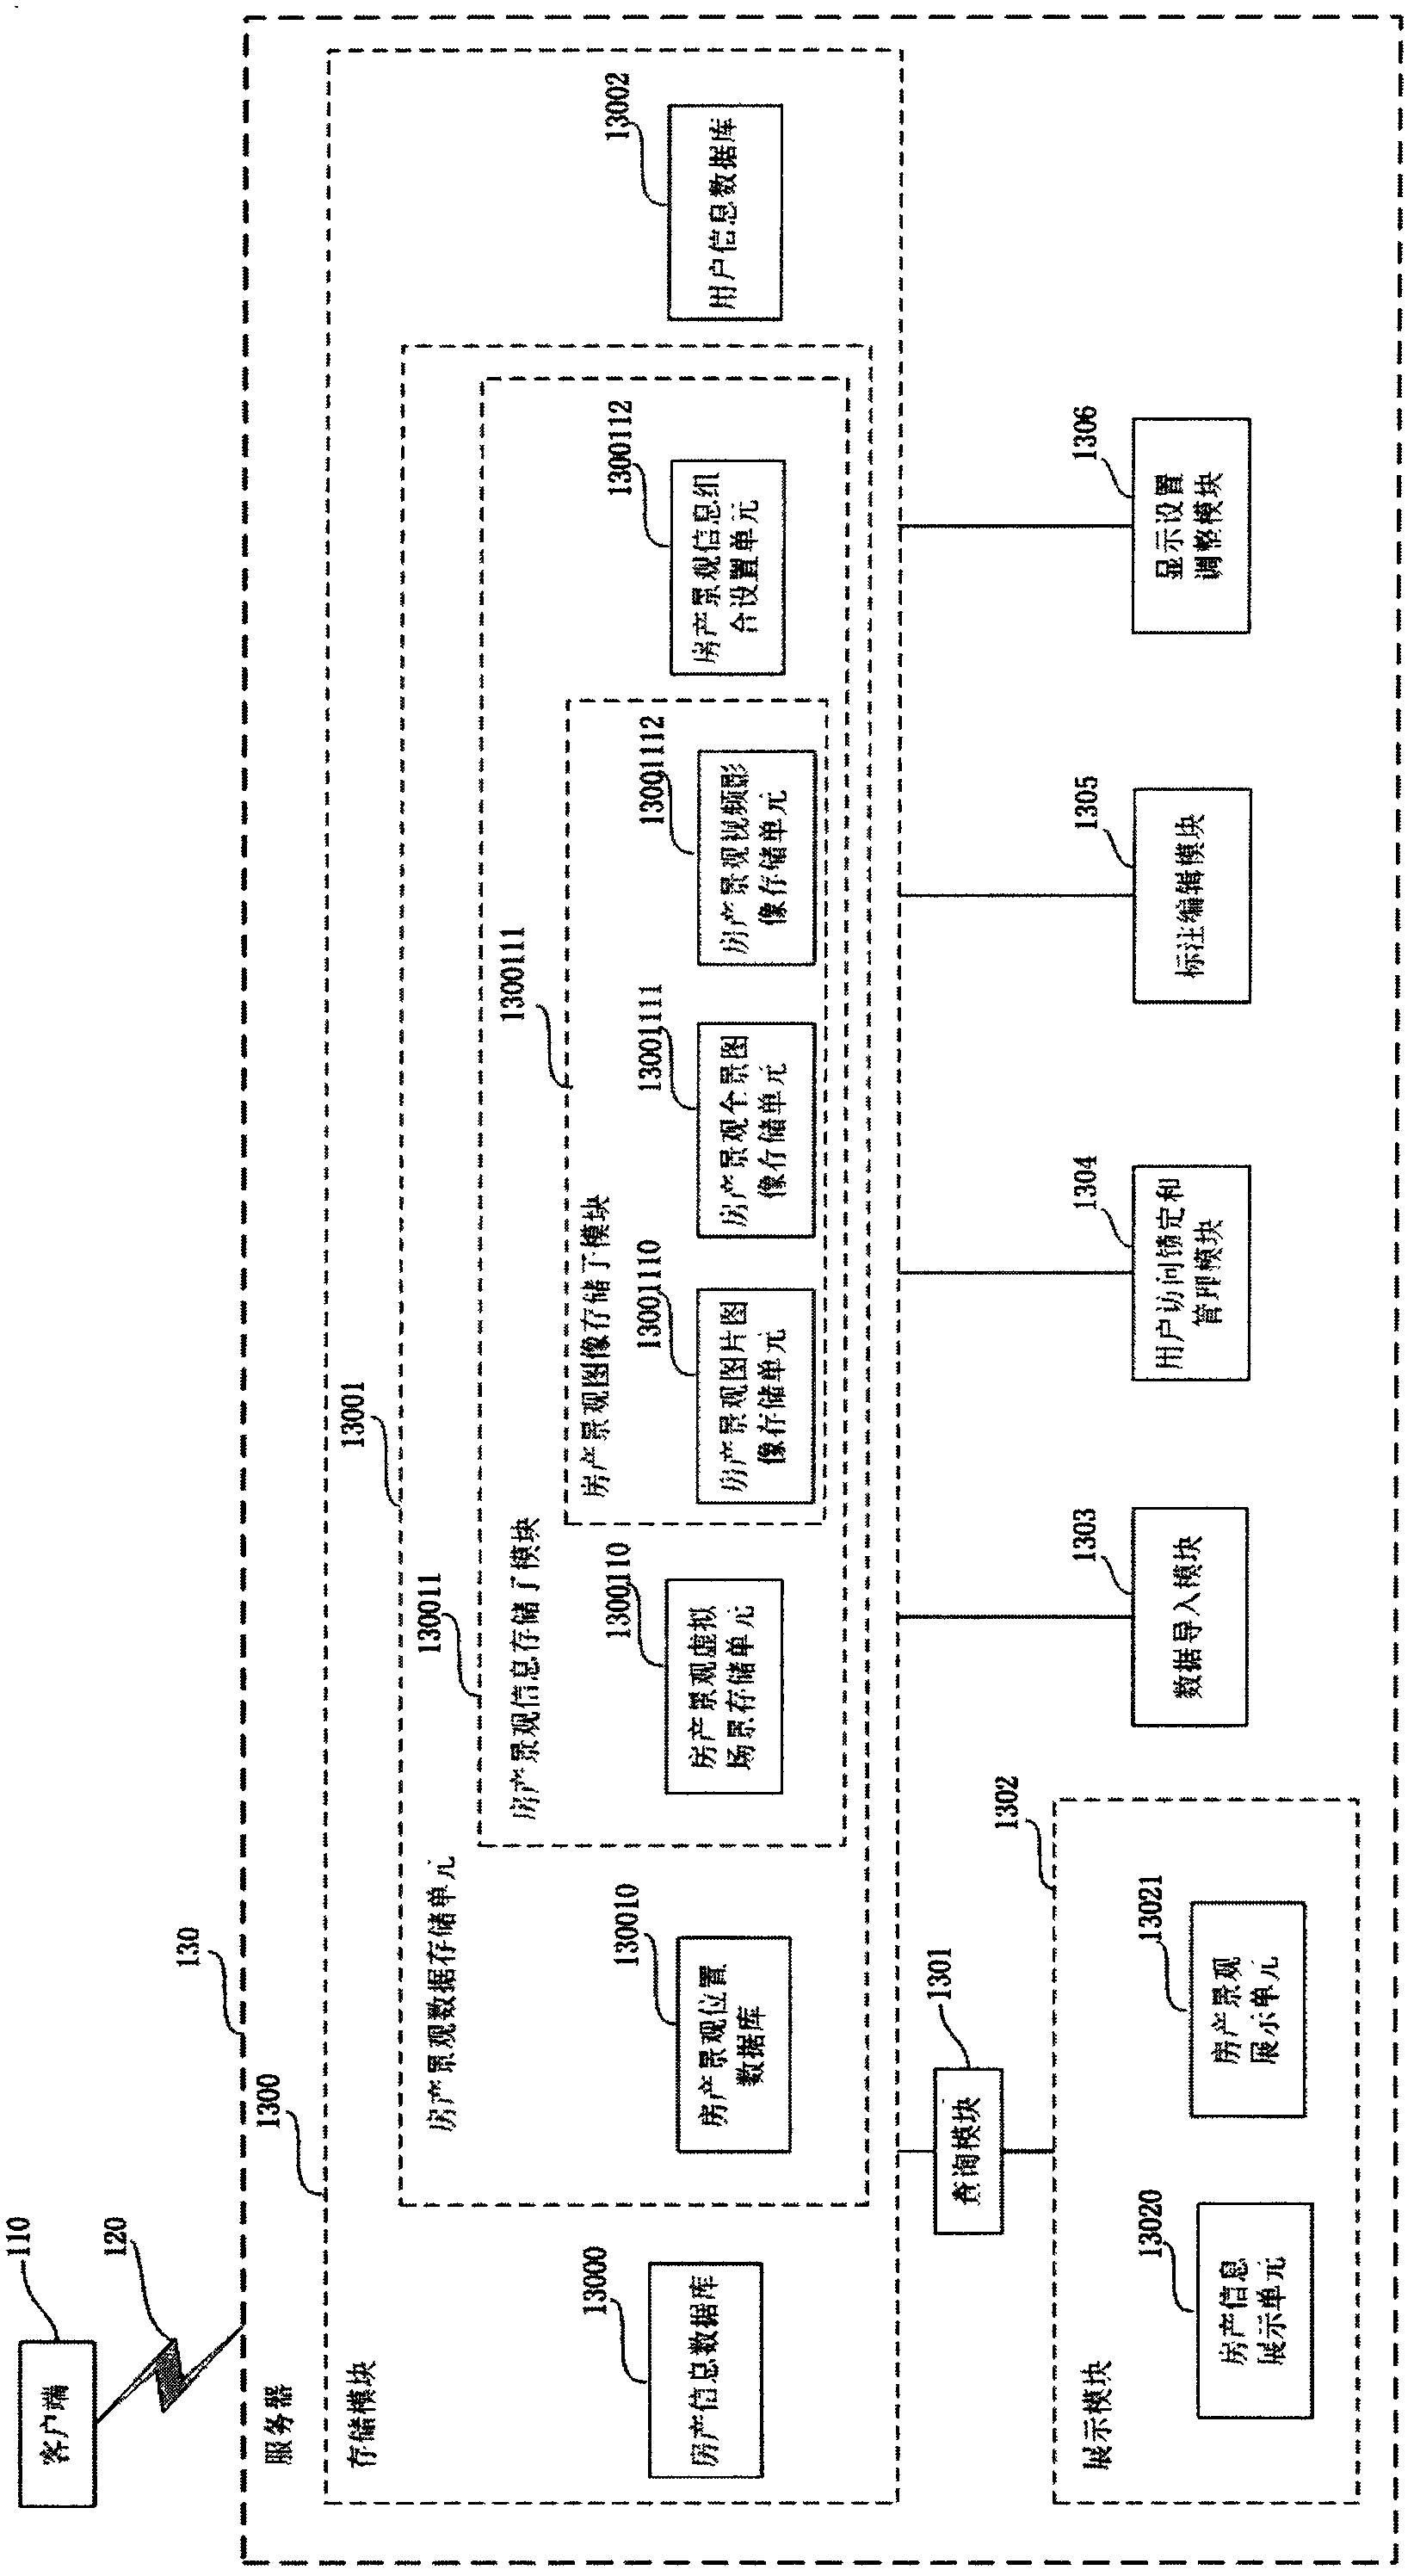 Systems and methods for displaying housing estate landscape data and generating housing estate landscape display data